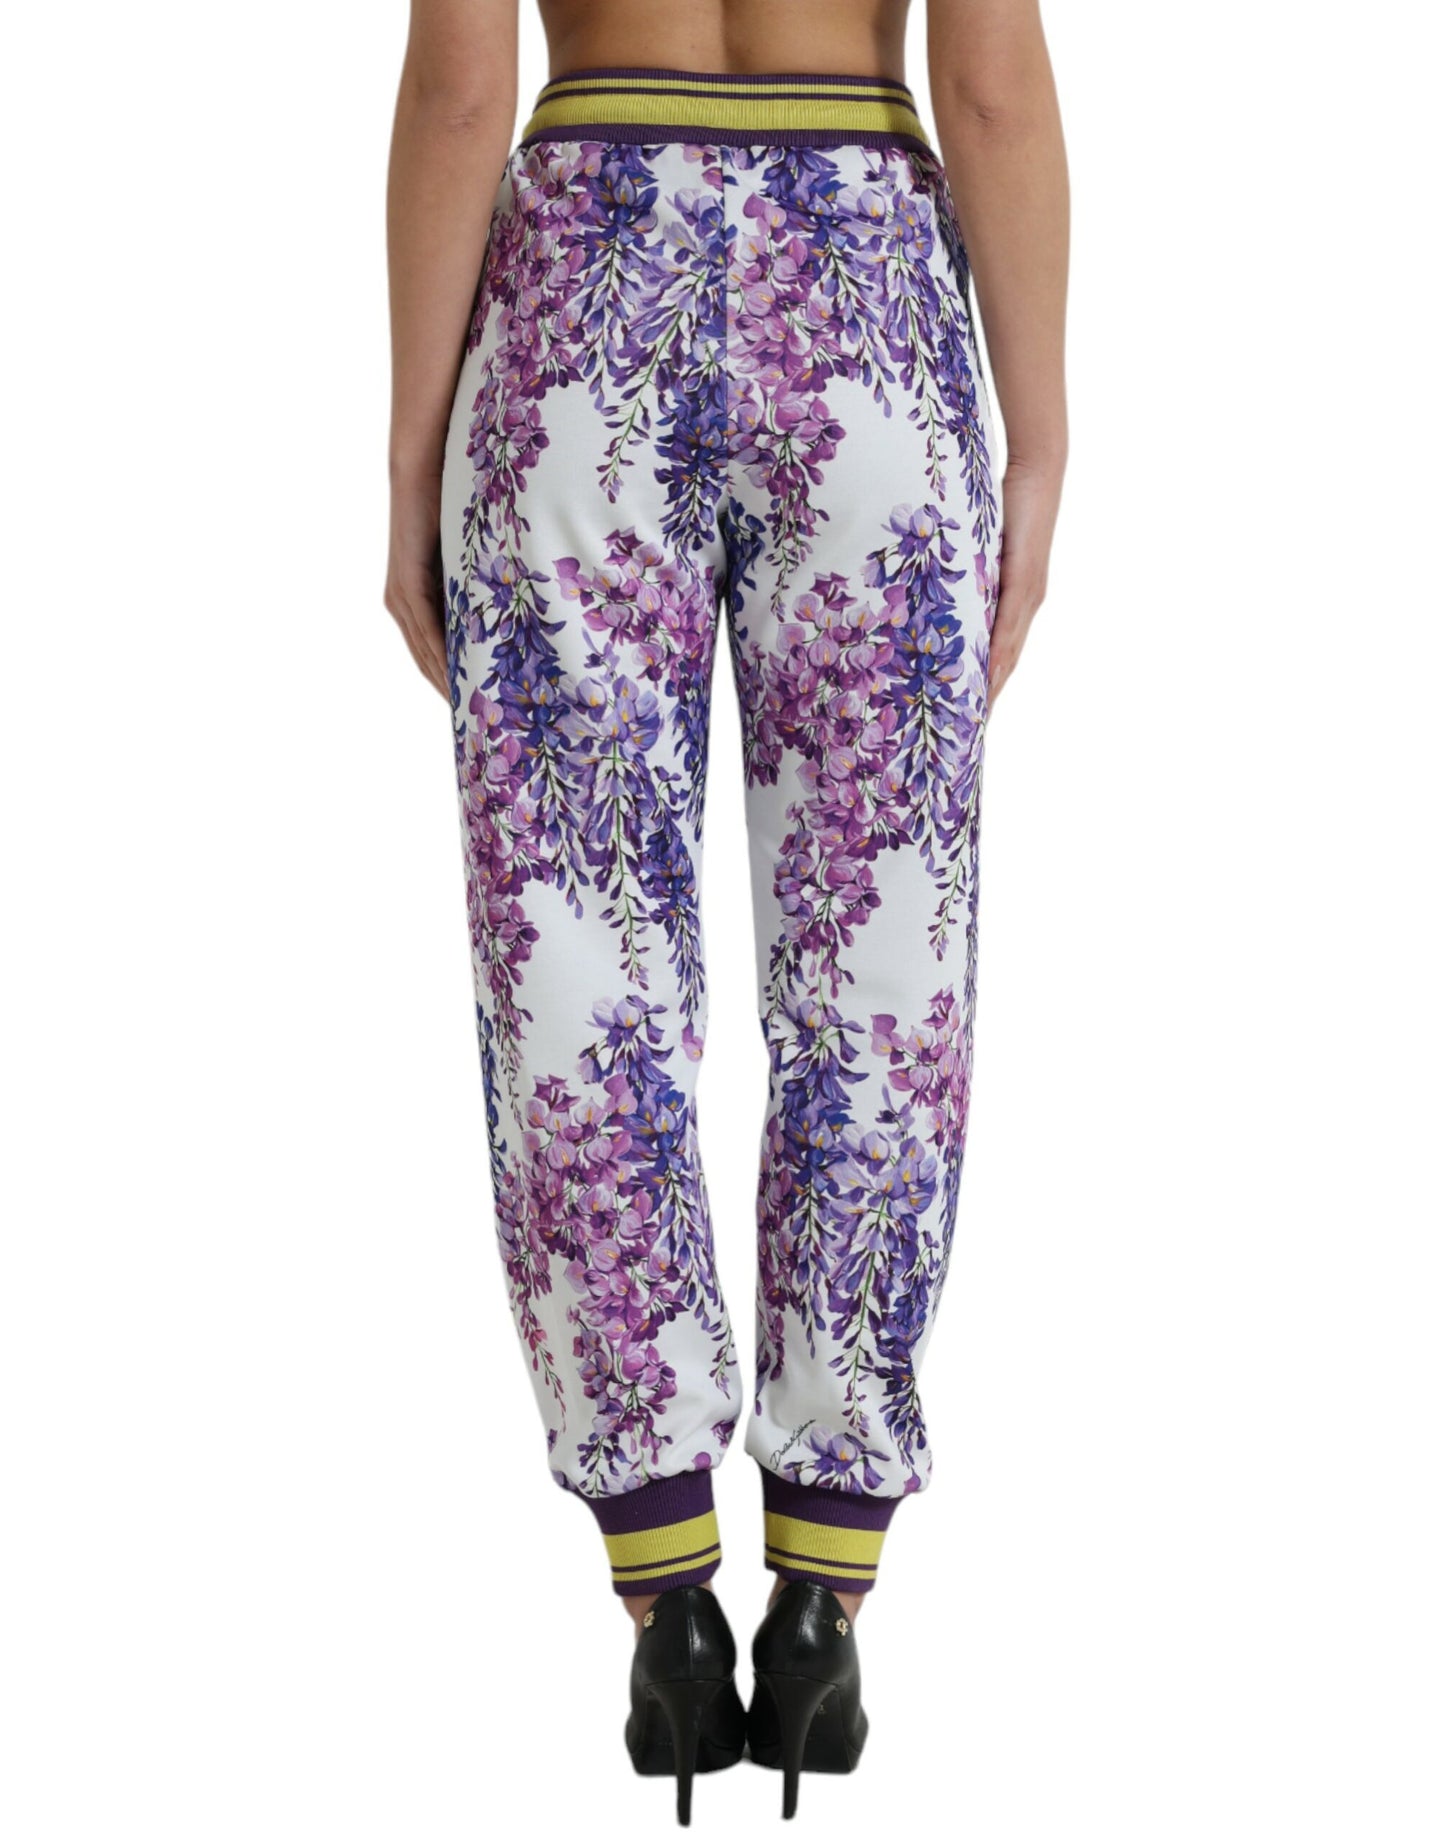 Dolce & Gabbana Elegant Floral Jogger Pants for a Chic Look